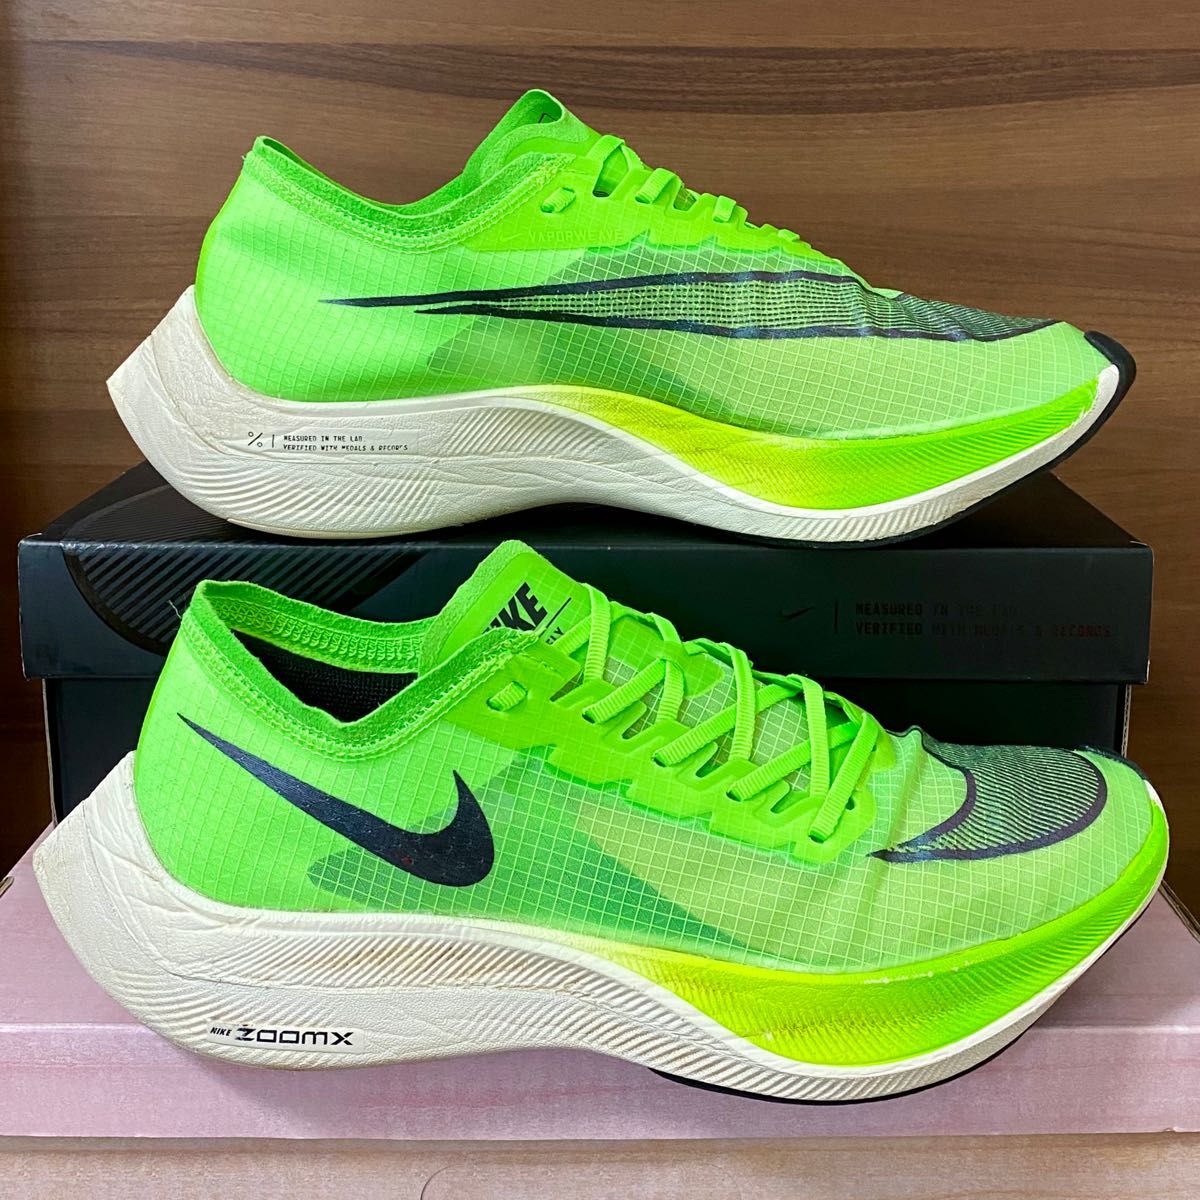 NIKE ZoomX Vaporfly NEXT% 28 0cm(ナイキ初代ズームXヴェイパー